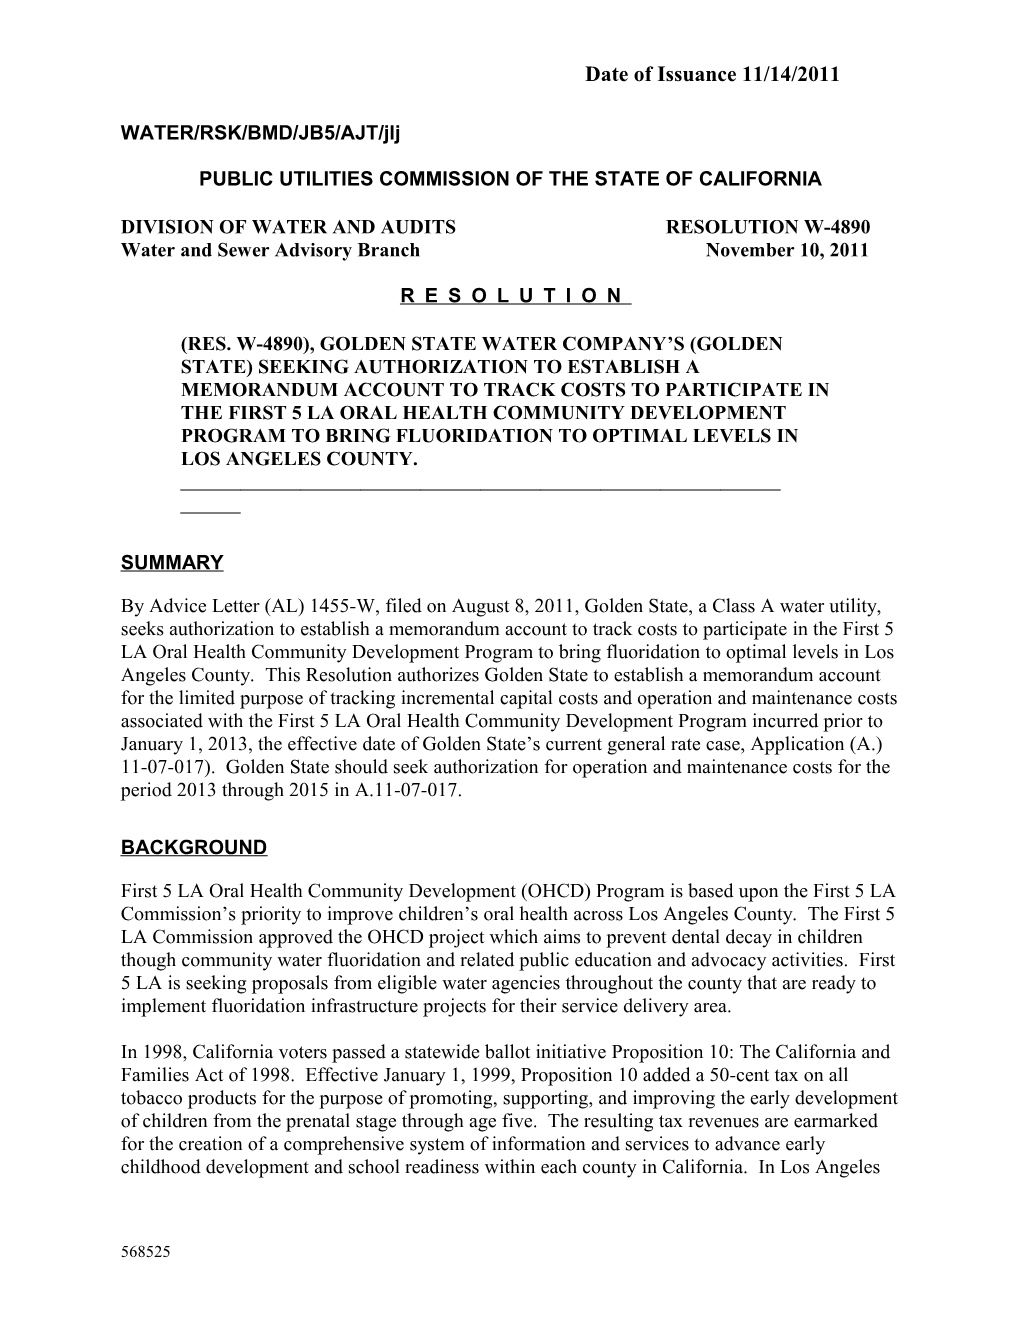 Public Utilities Commission of the State of California s69